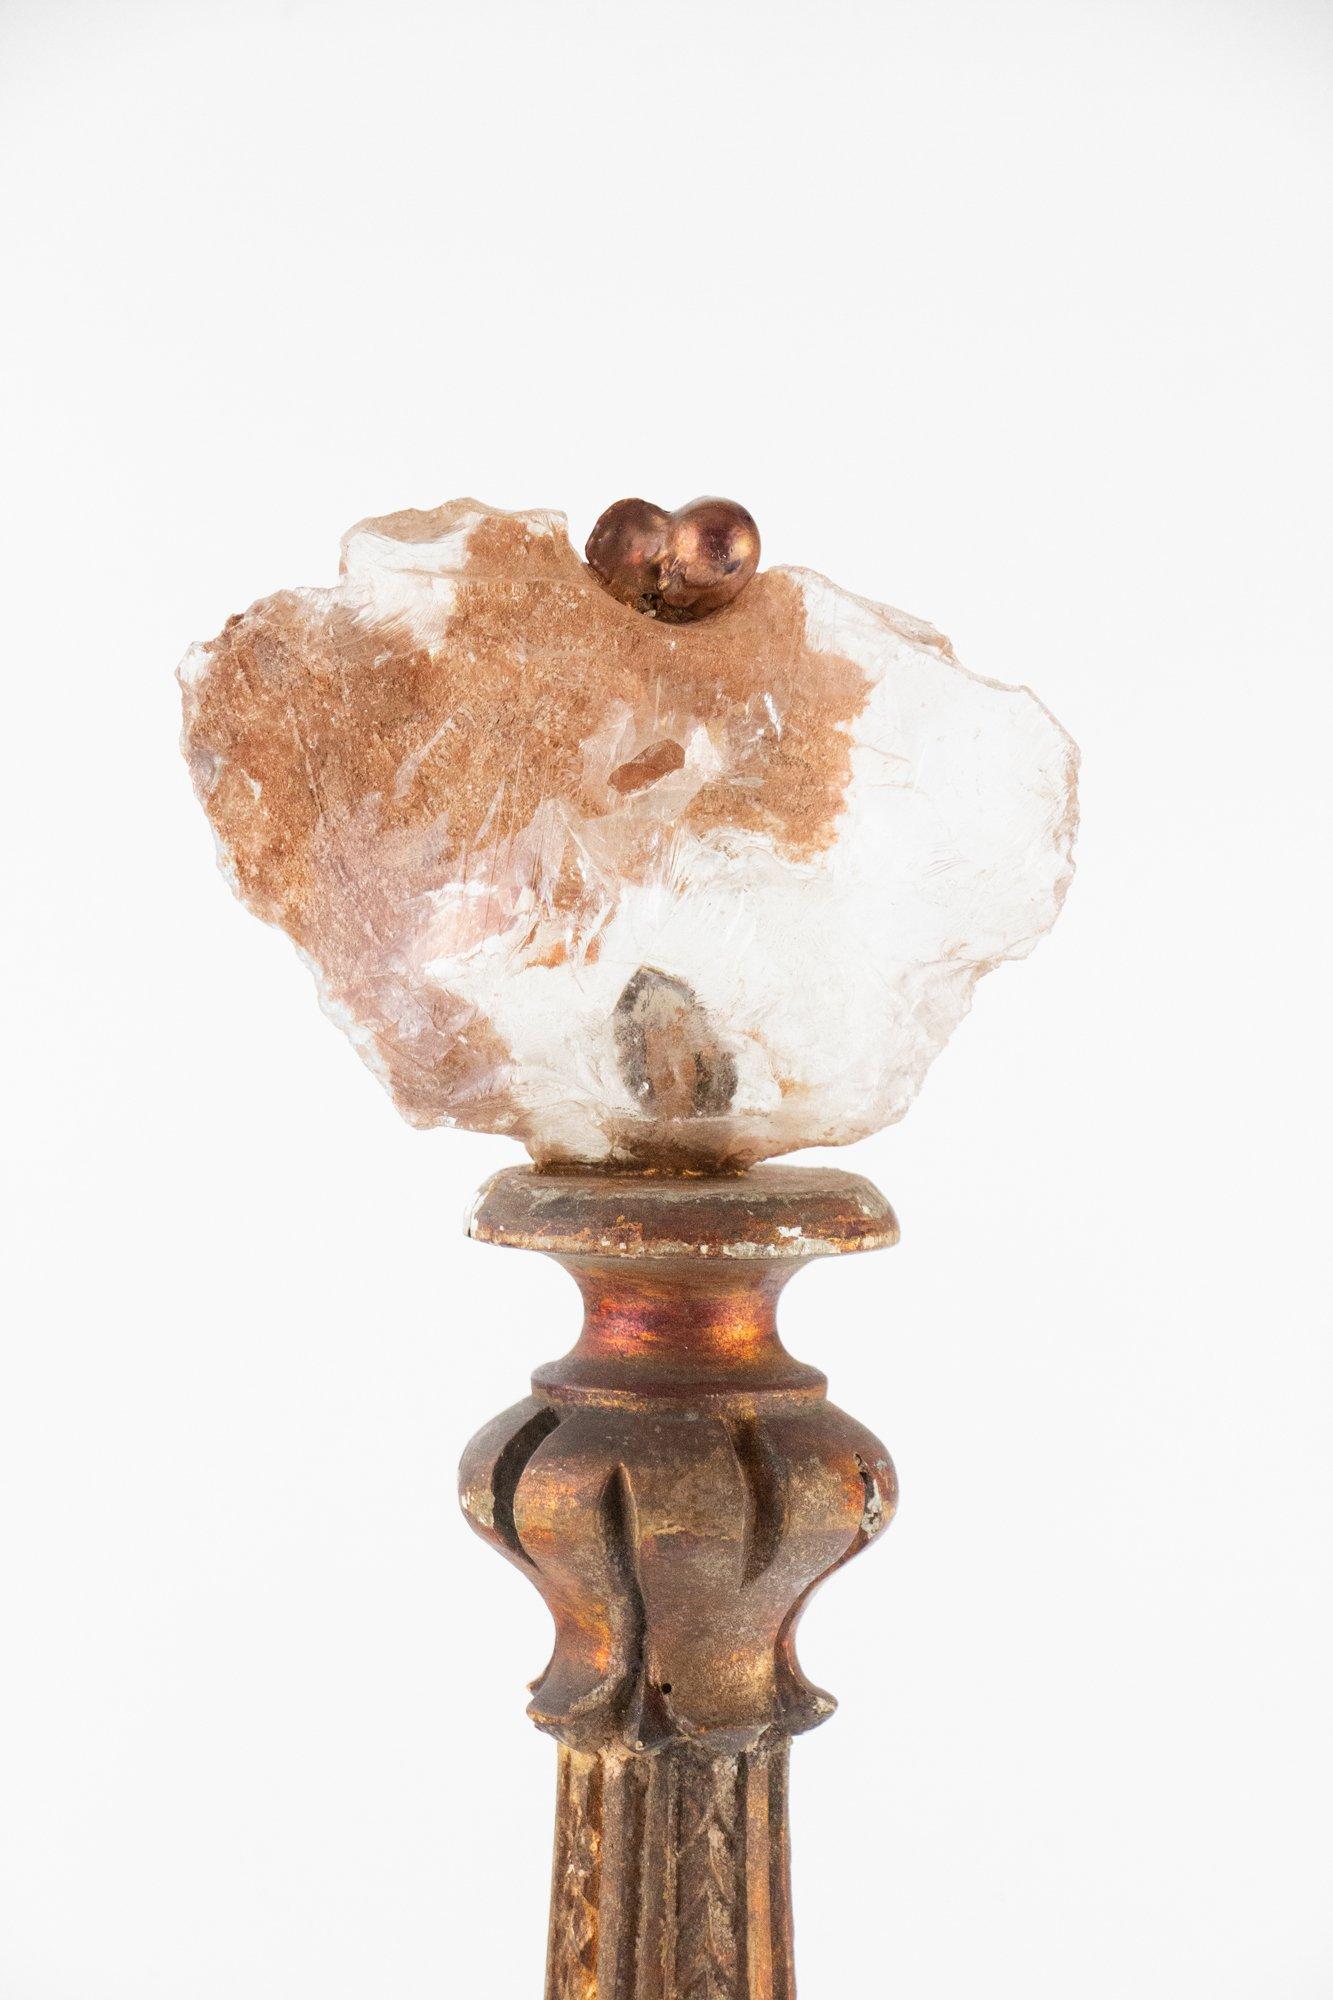 18th century Italian candlestick decorated with free-forming glass and baroque pearls on an Italian glass bobeche base.

The 18th century candlestick is from Tuscany. It is hand carved and hand painted with brownish-red metallic paint. It is